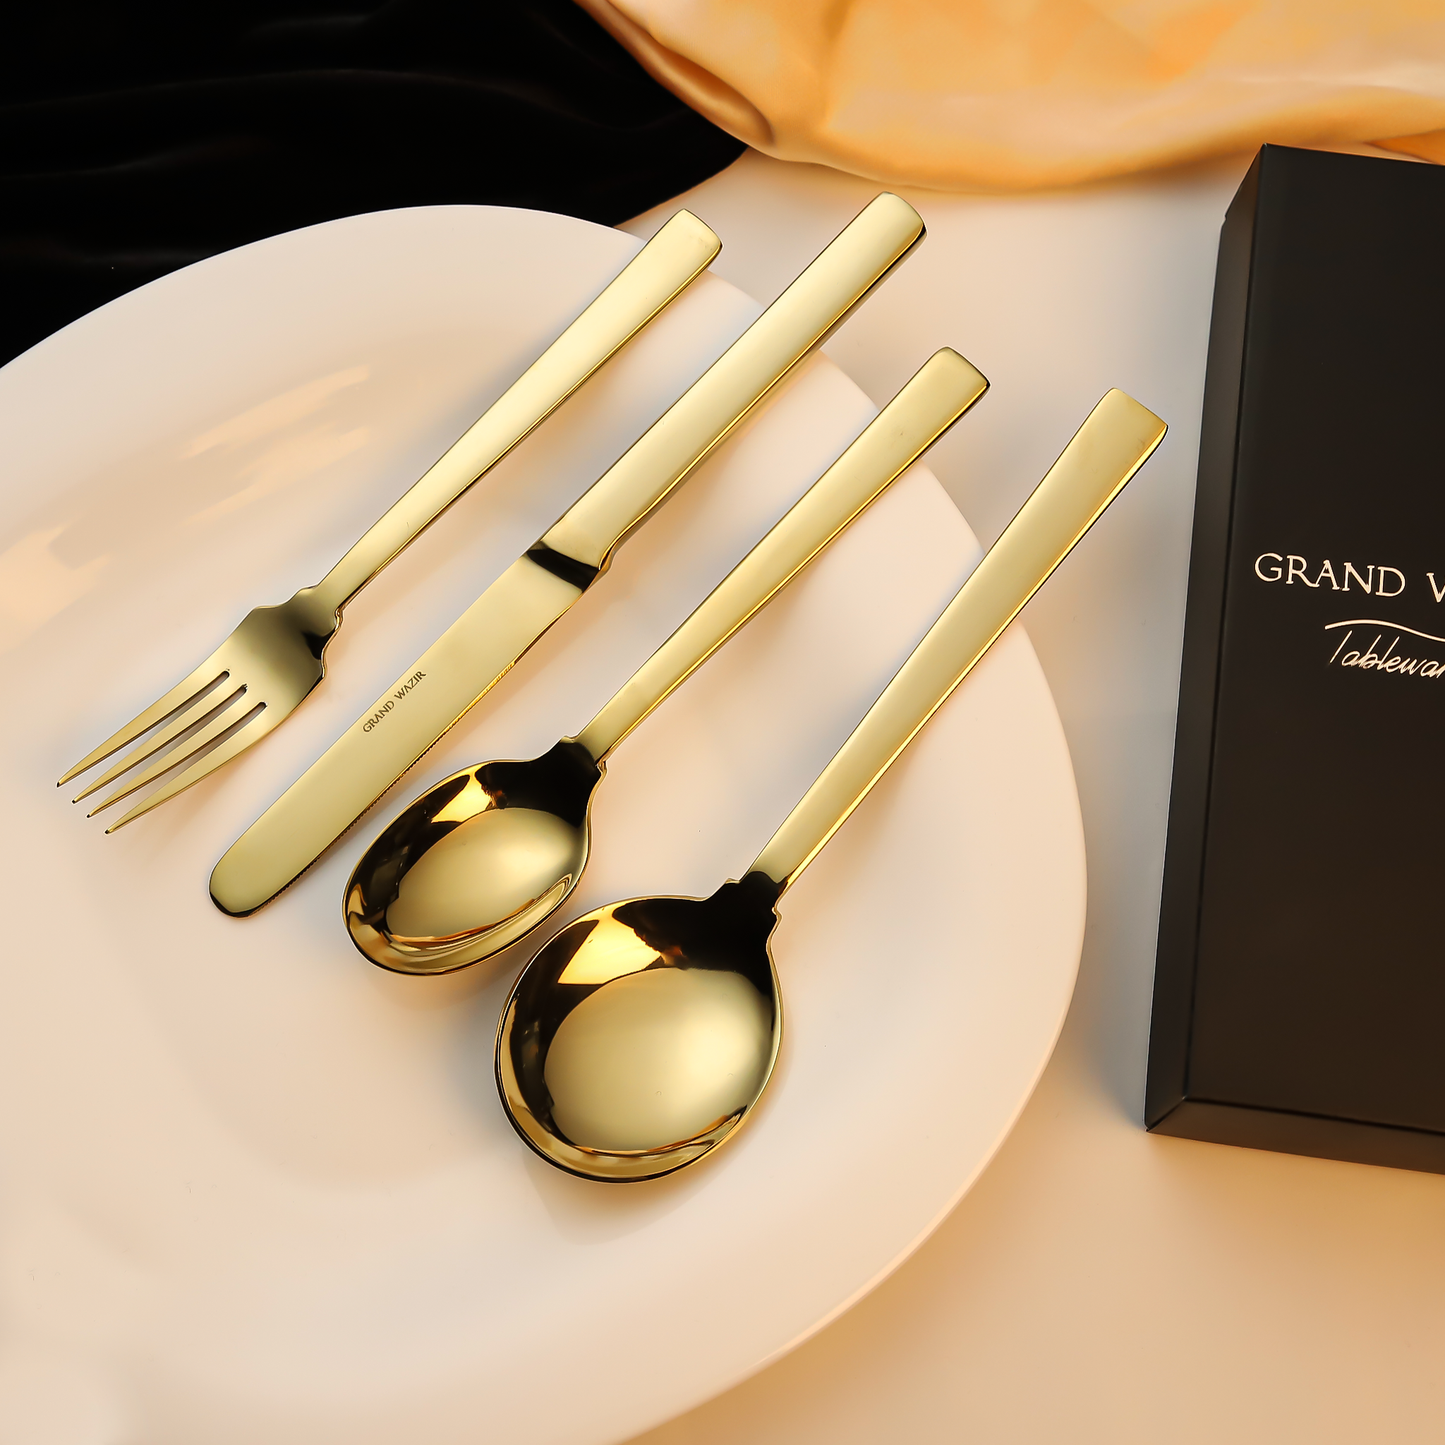 Zena Gold Plated Cutlery Set, 11 Gauge: Experience the Ultimate Gold Cutlery in Pakistan